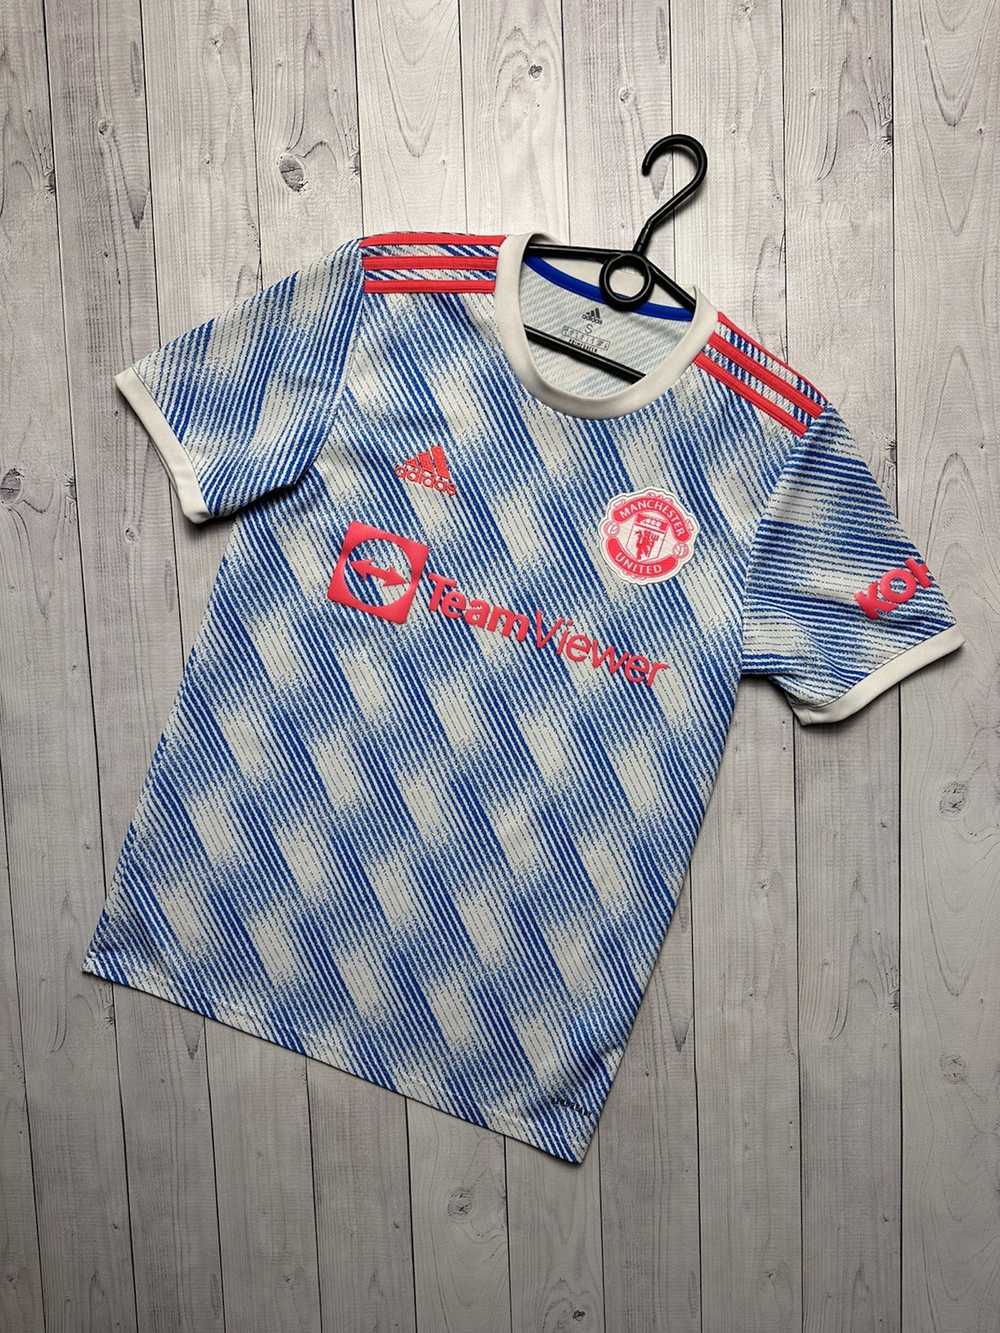 Adidas × Manchester United × Soccer Jersey Manche… - image 1